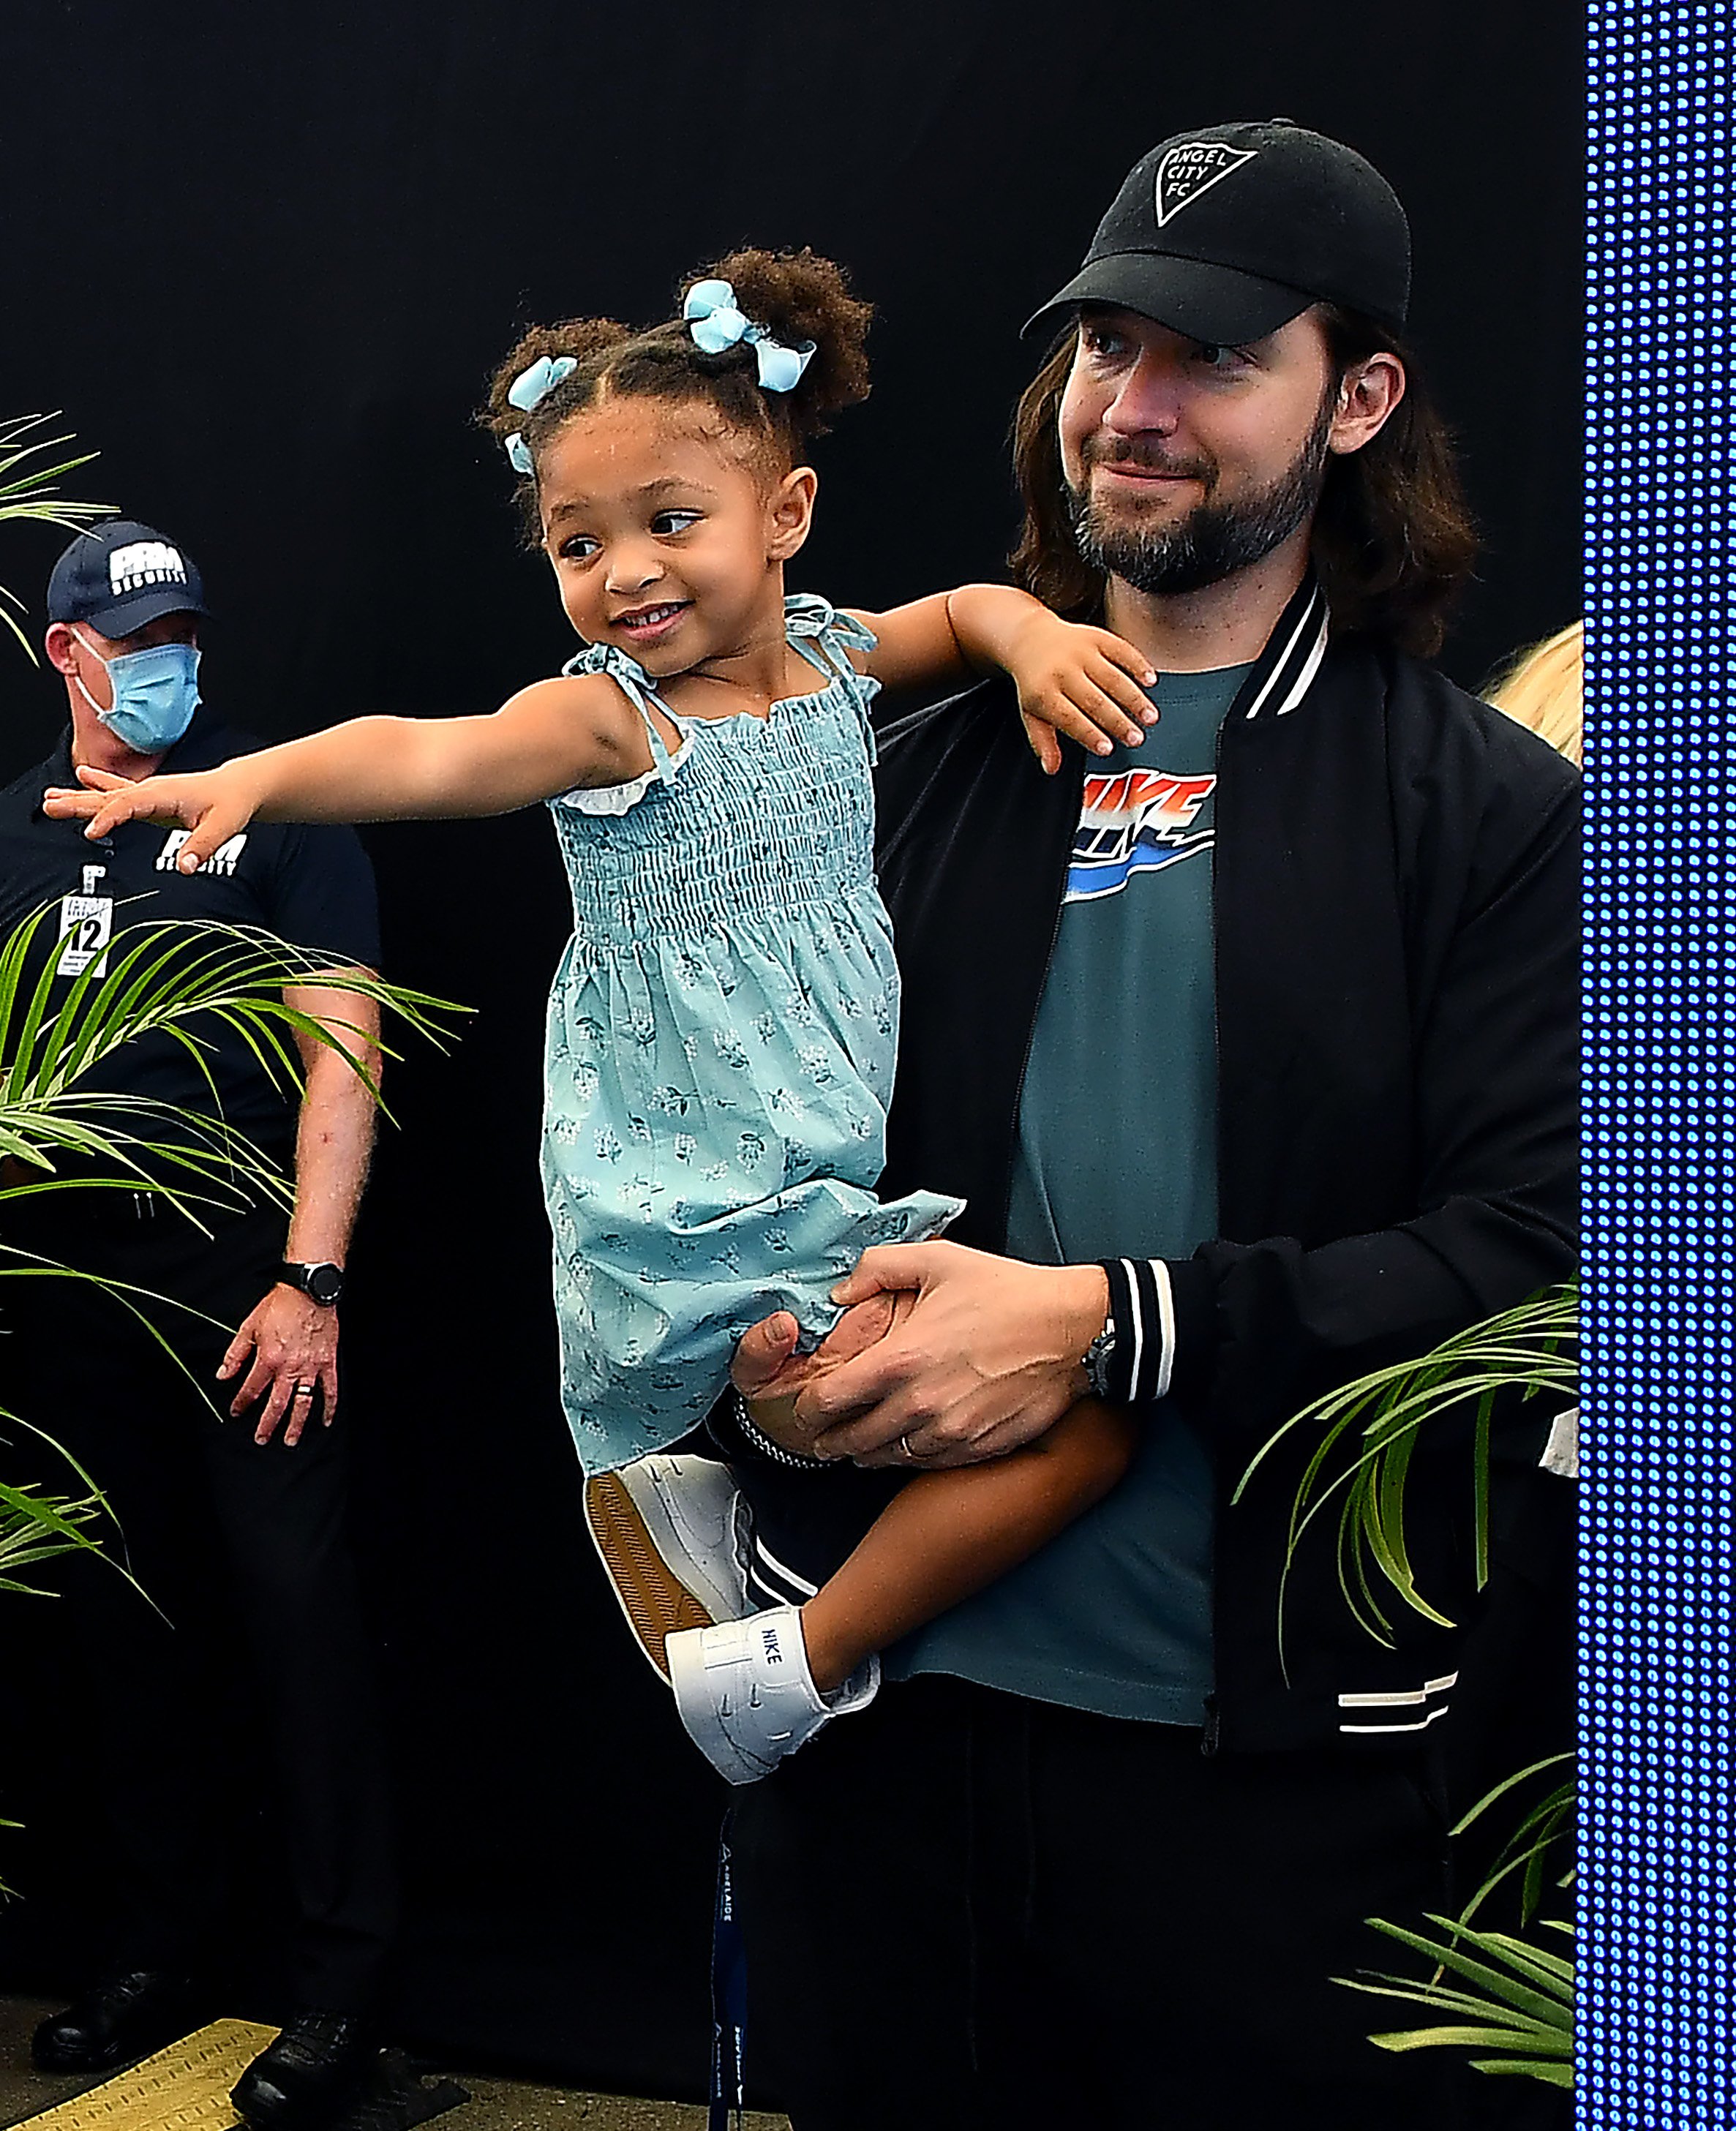 Alexis Olympia Ohanian Jr. and Alexis Ohanian Sr. during the "A Day at the Drive" exhibition tournament on January 29, 2021, in Adelaide, Australia. | Source: Mark Brake/Getty Images